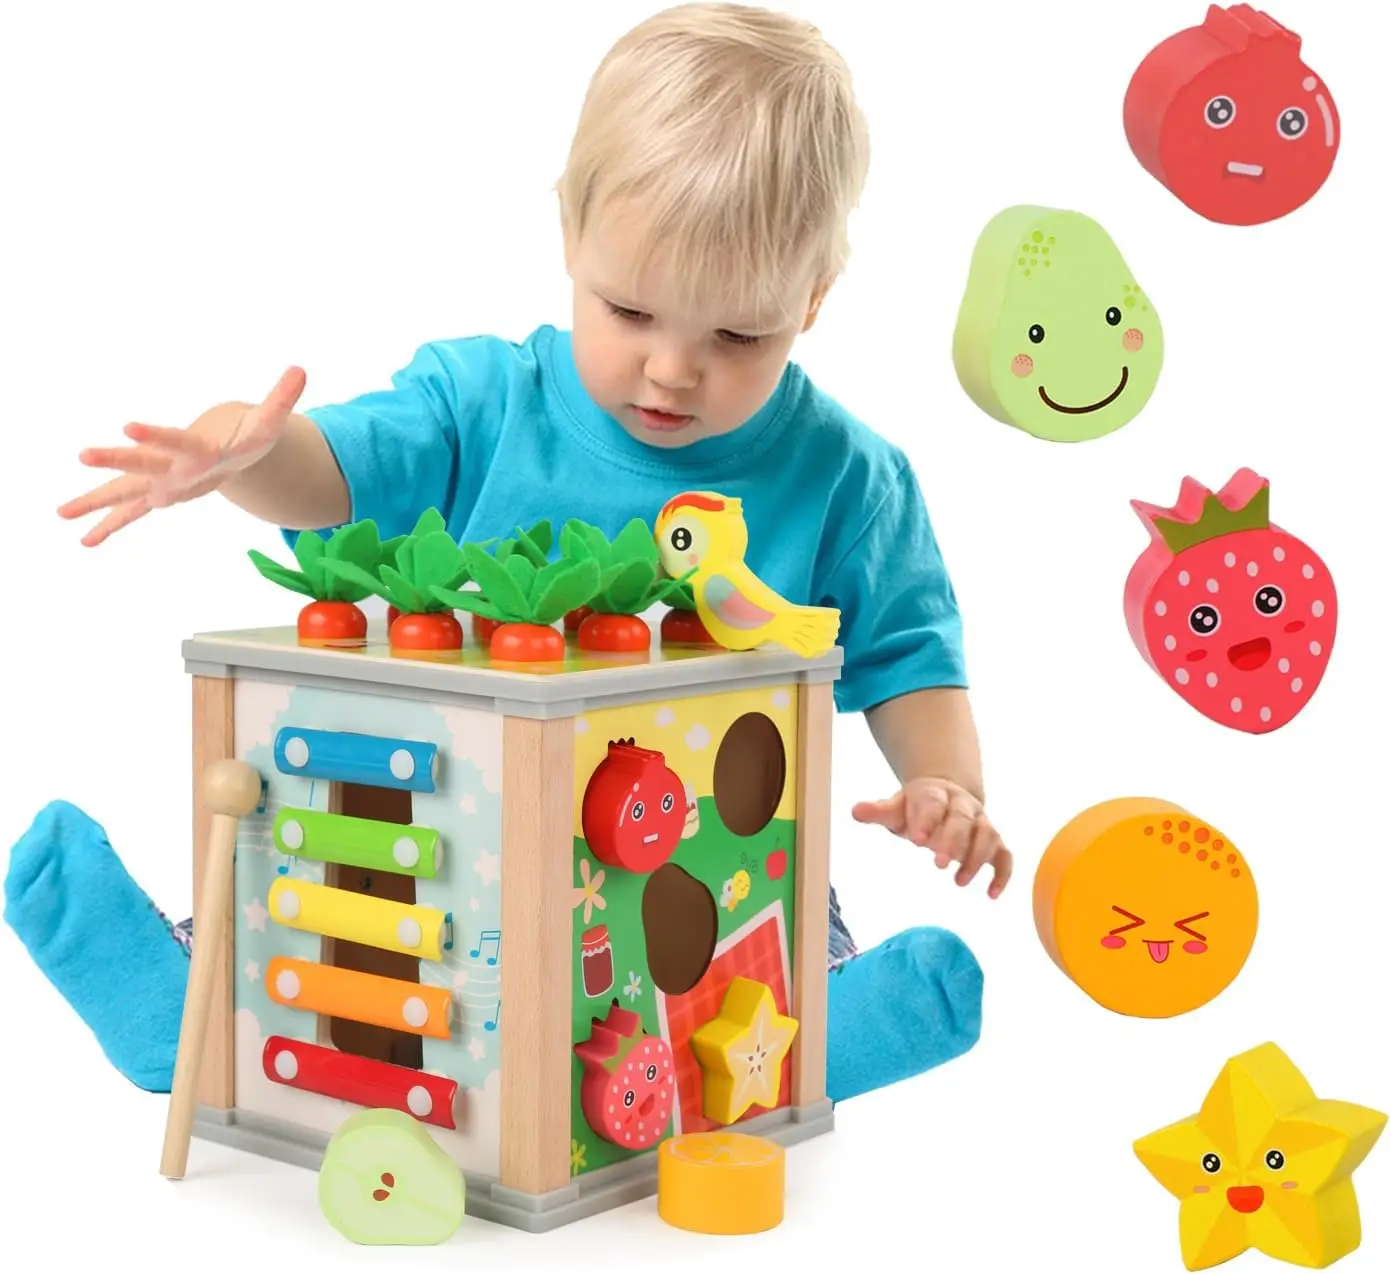 

6in1 Wooden Activity Cube Montessori Toys for 12M+ Baby Carrots Harvest Game&Bead Maze Preschool Learning Education Shape Sorter